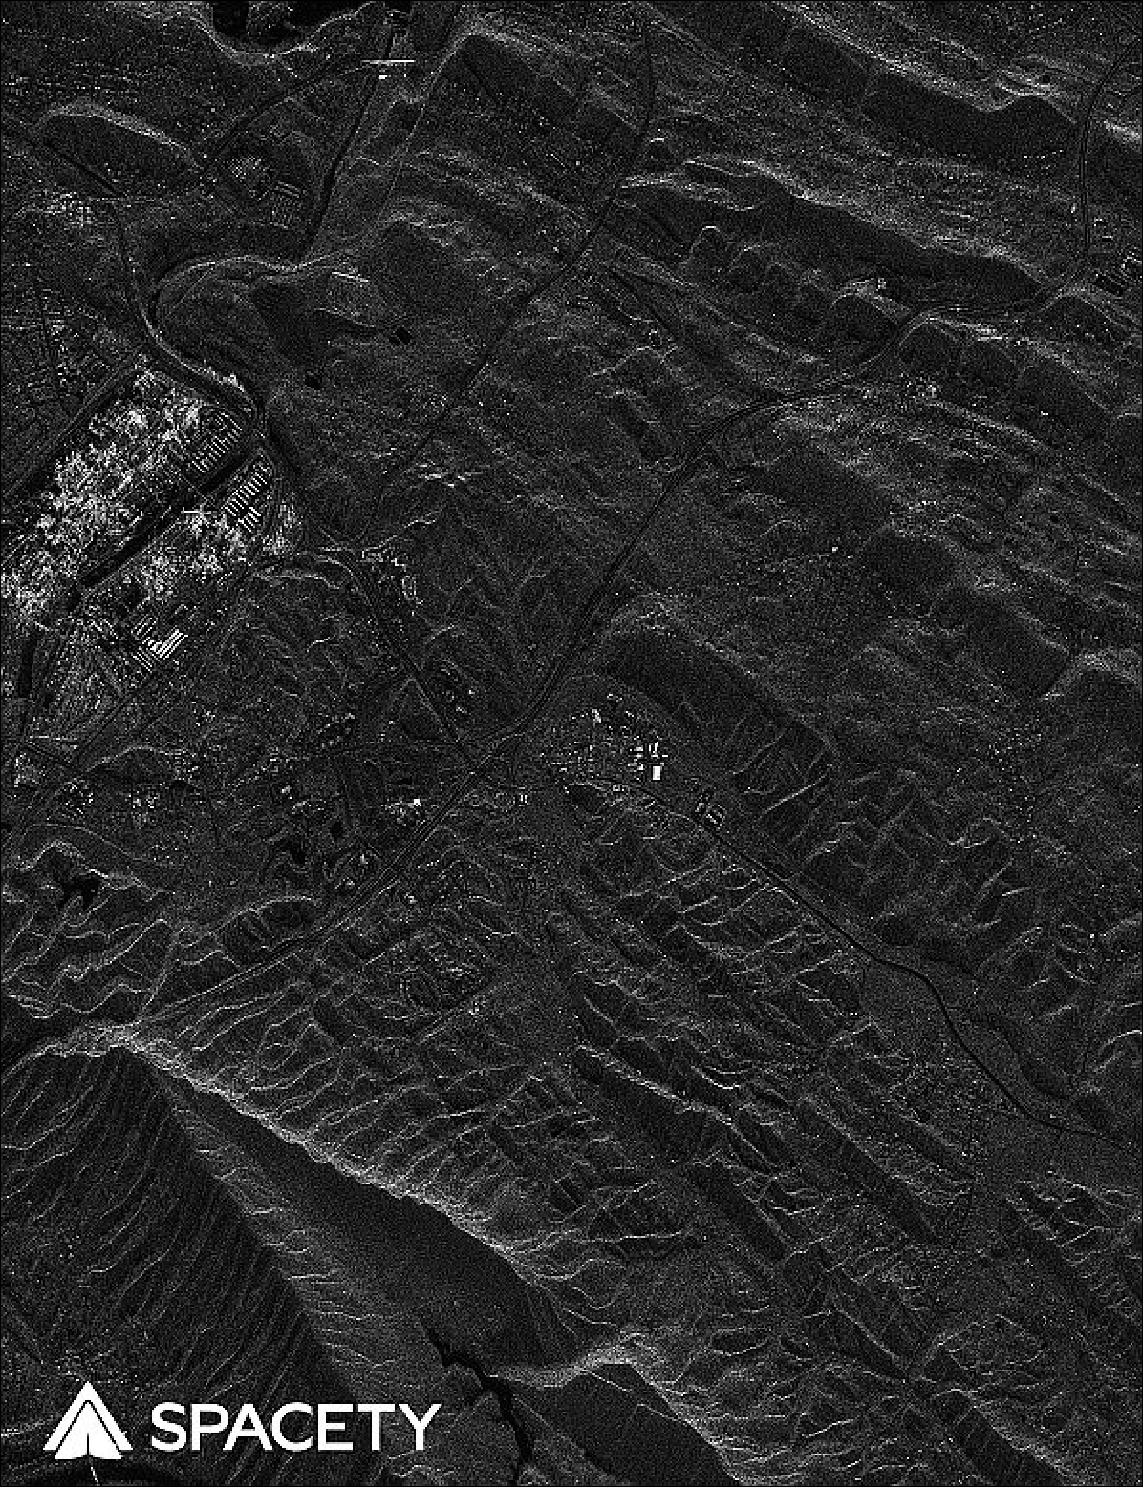 Figure 10: Chinese startup Spacety began releasing imagery captured by HISEA-1, a 185 kg C-band Synthetic Aperture Radar satellite, launched in December on a Long March 8 rocket. This is an image of Tennessee (image credit: Spacety)